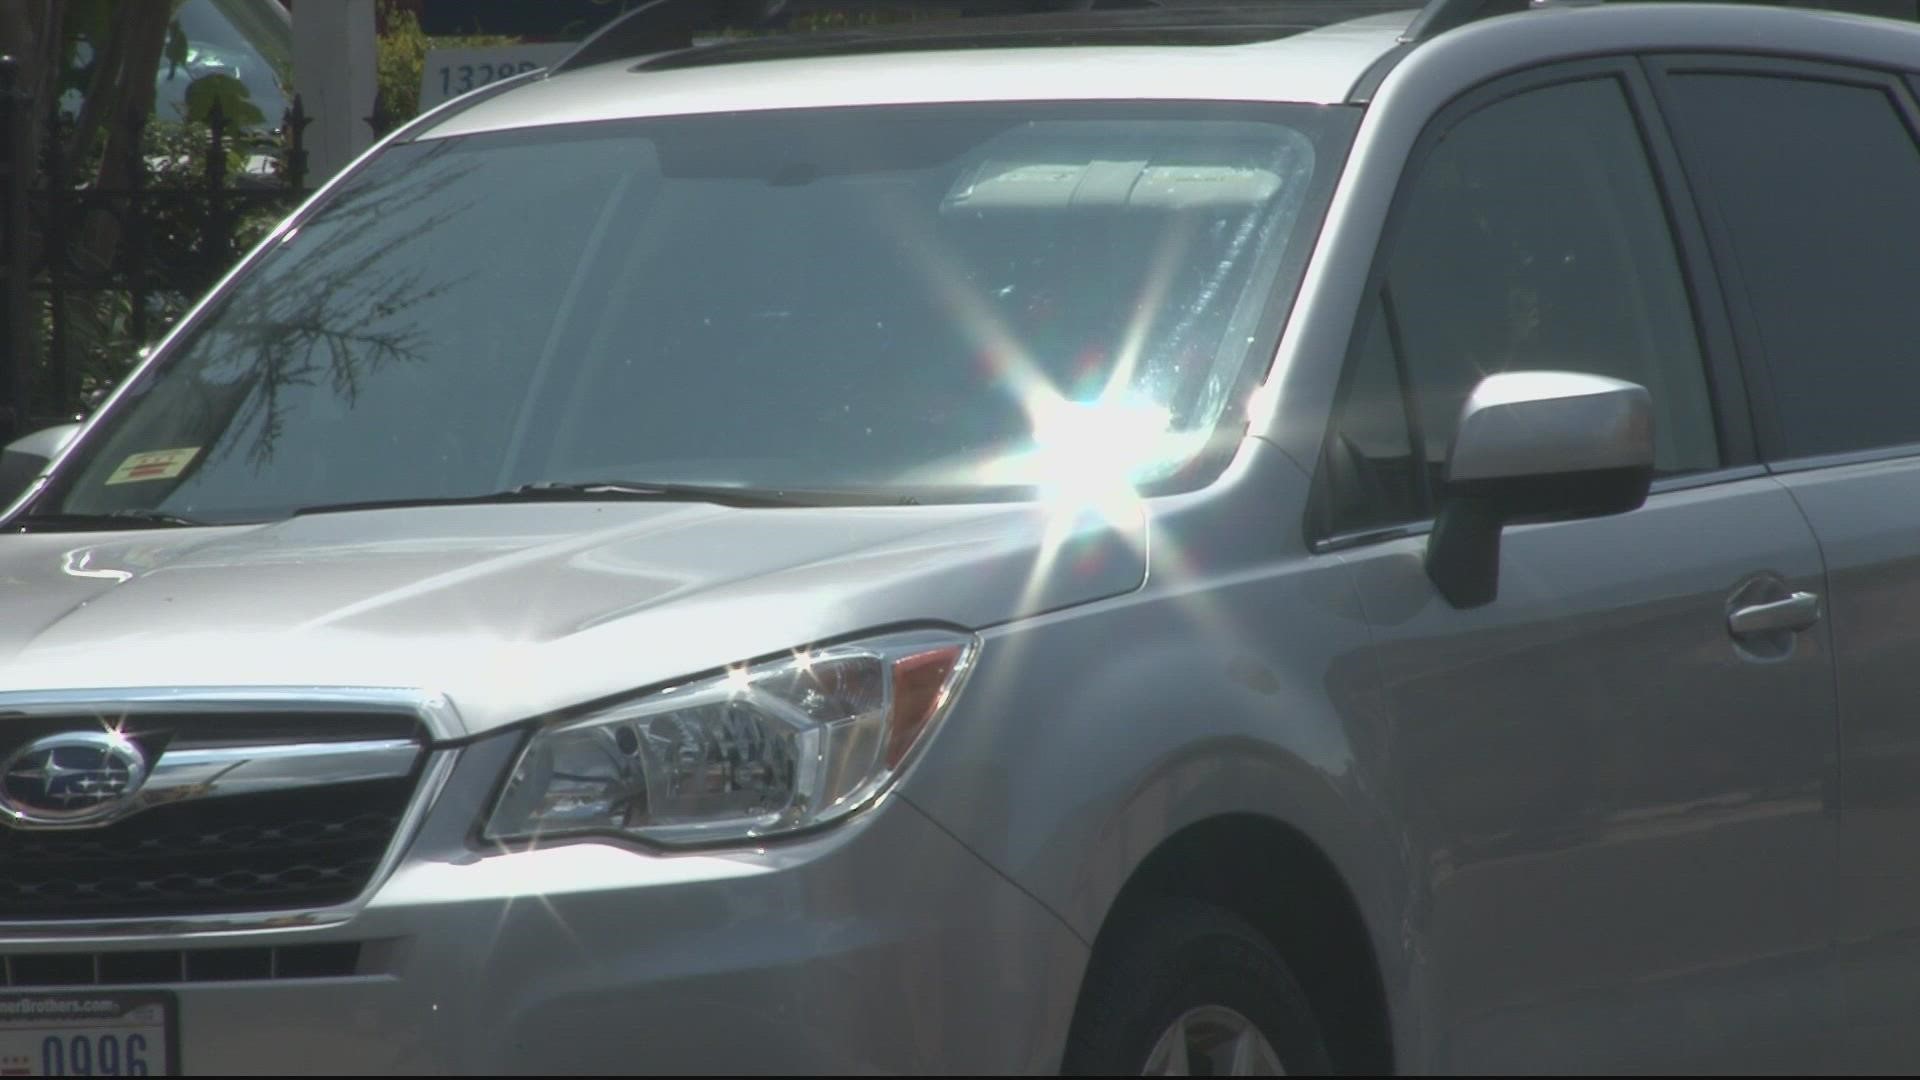 A 3-month-old has died after being left in a hot car in Northwest D.C. Tuesday evening